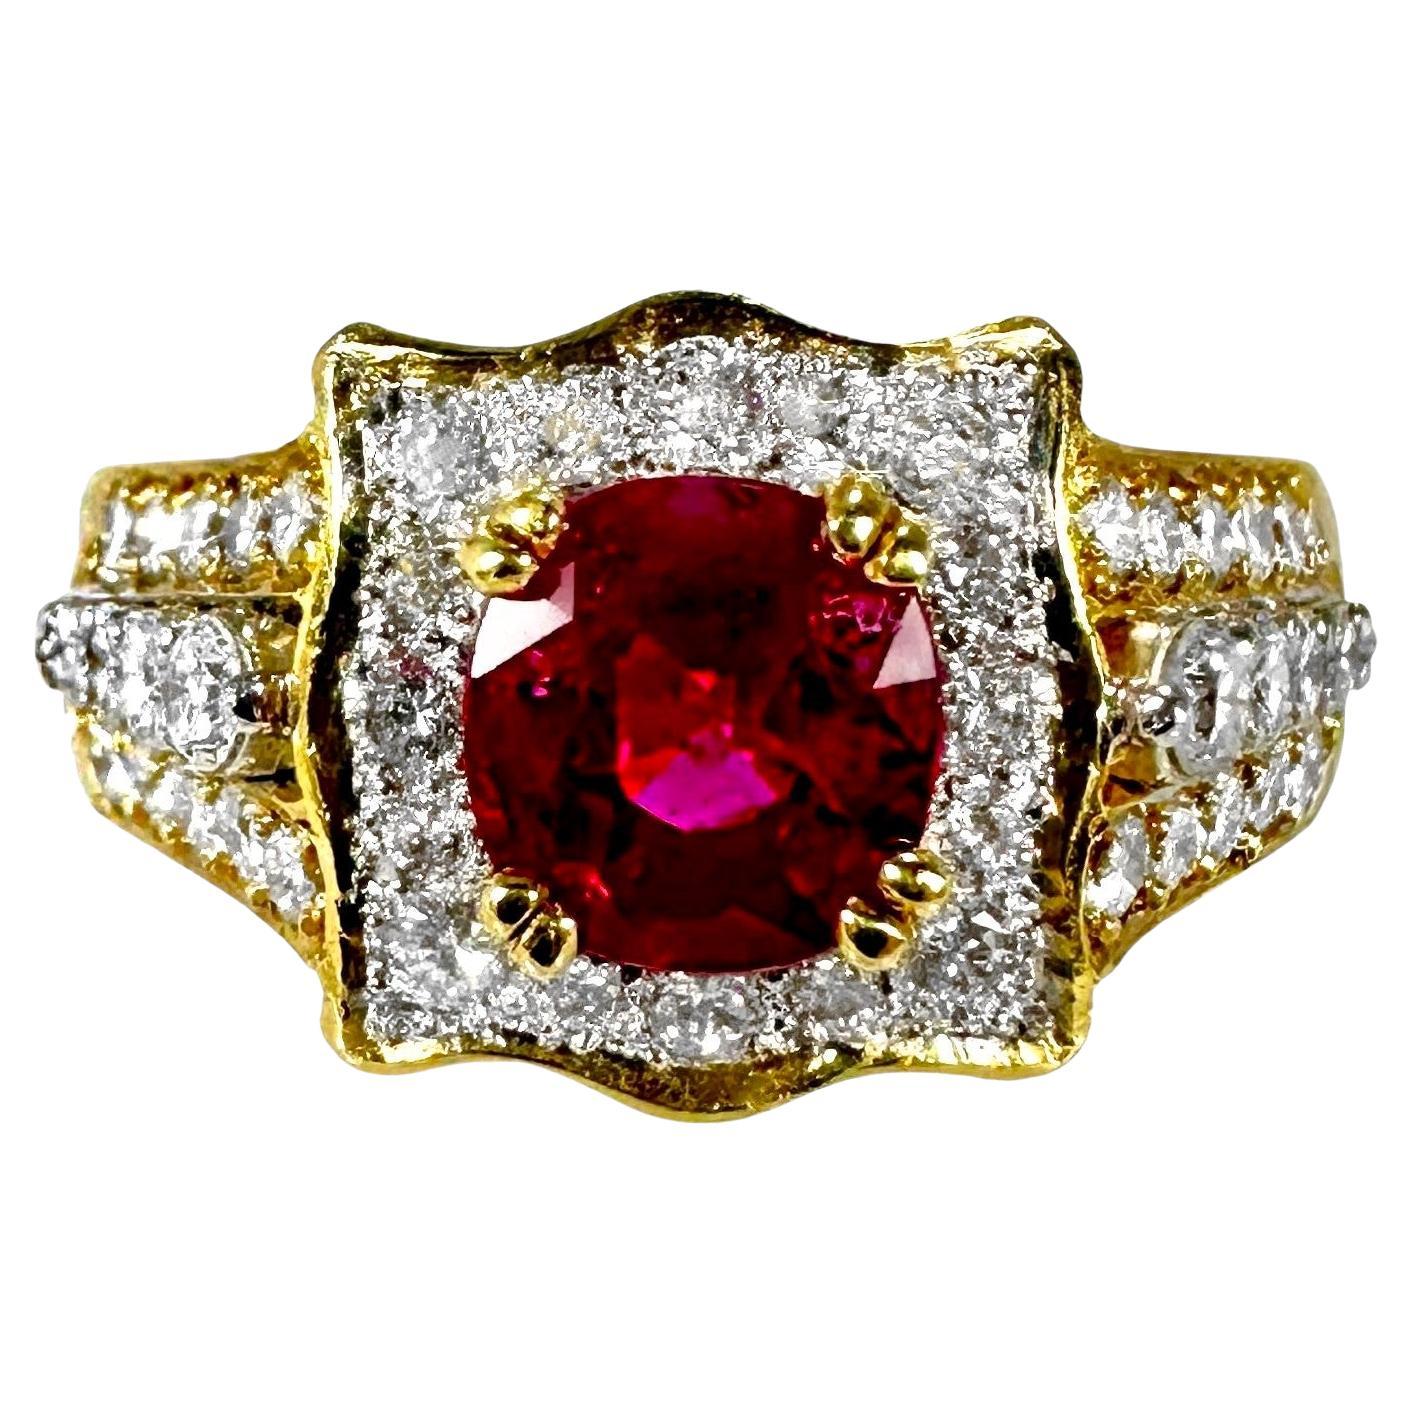 Lovely Traditional 18k Yellow Gold Ladies Cocktail Ring with Ruby and Diamonds